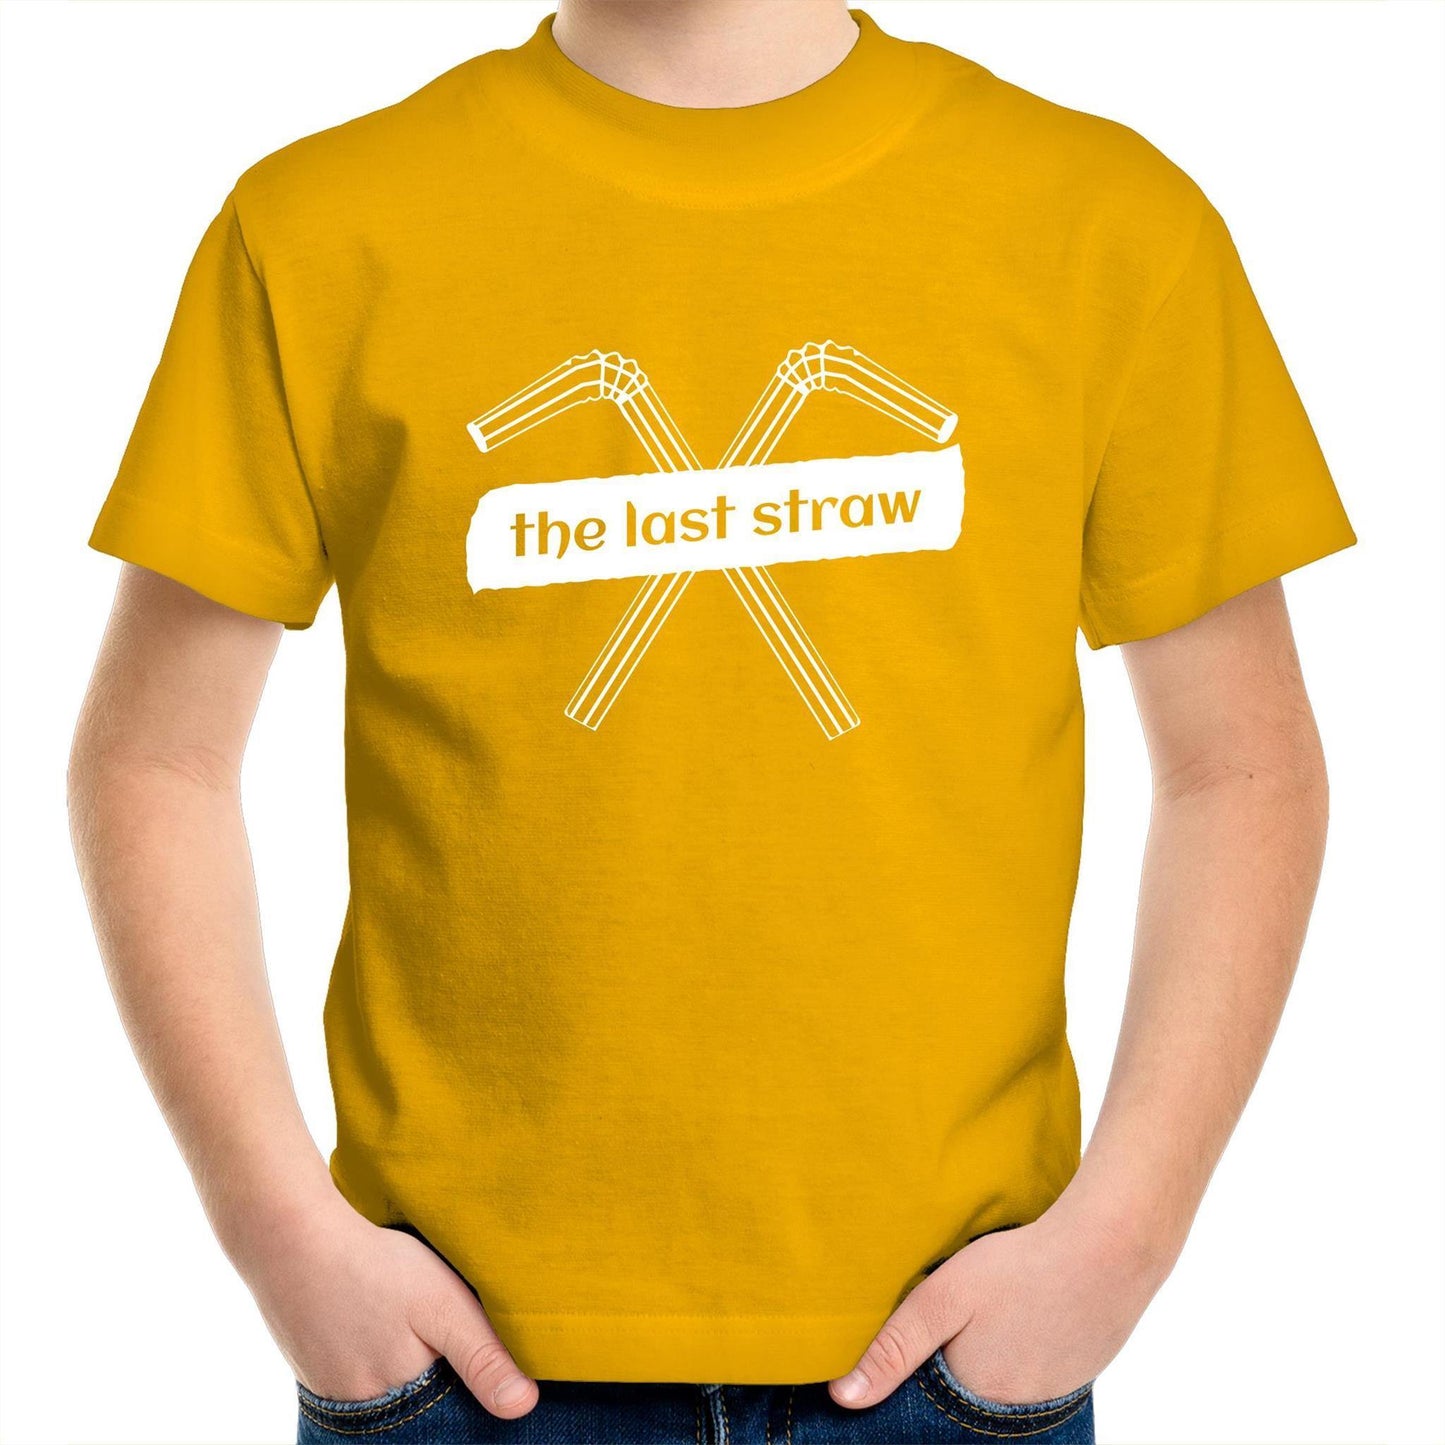 The Last Straw - Kids Youth Crew T-Shirt Gold Kids Youth T-shirt Environment